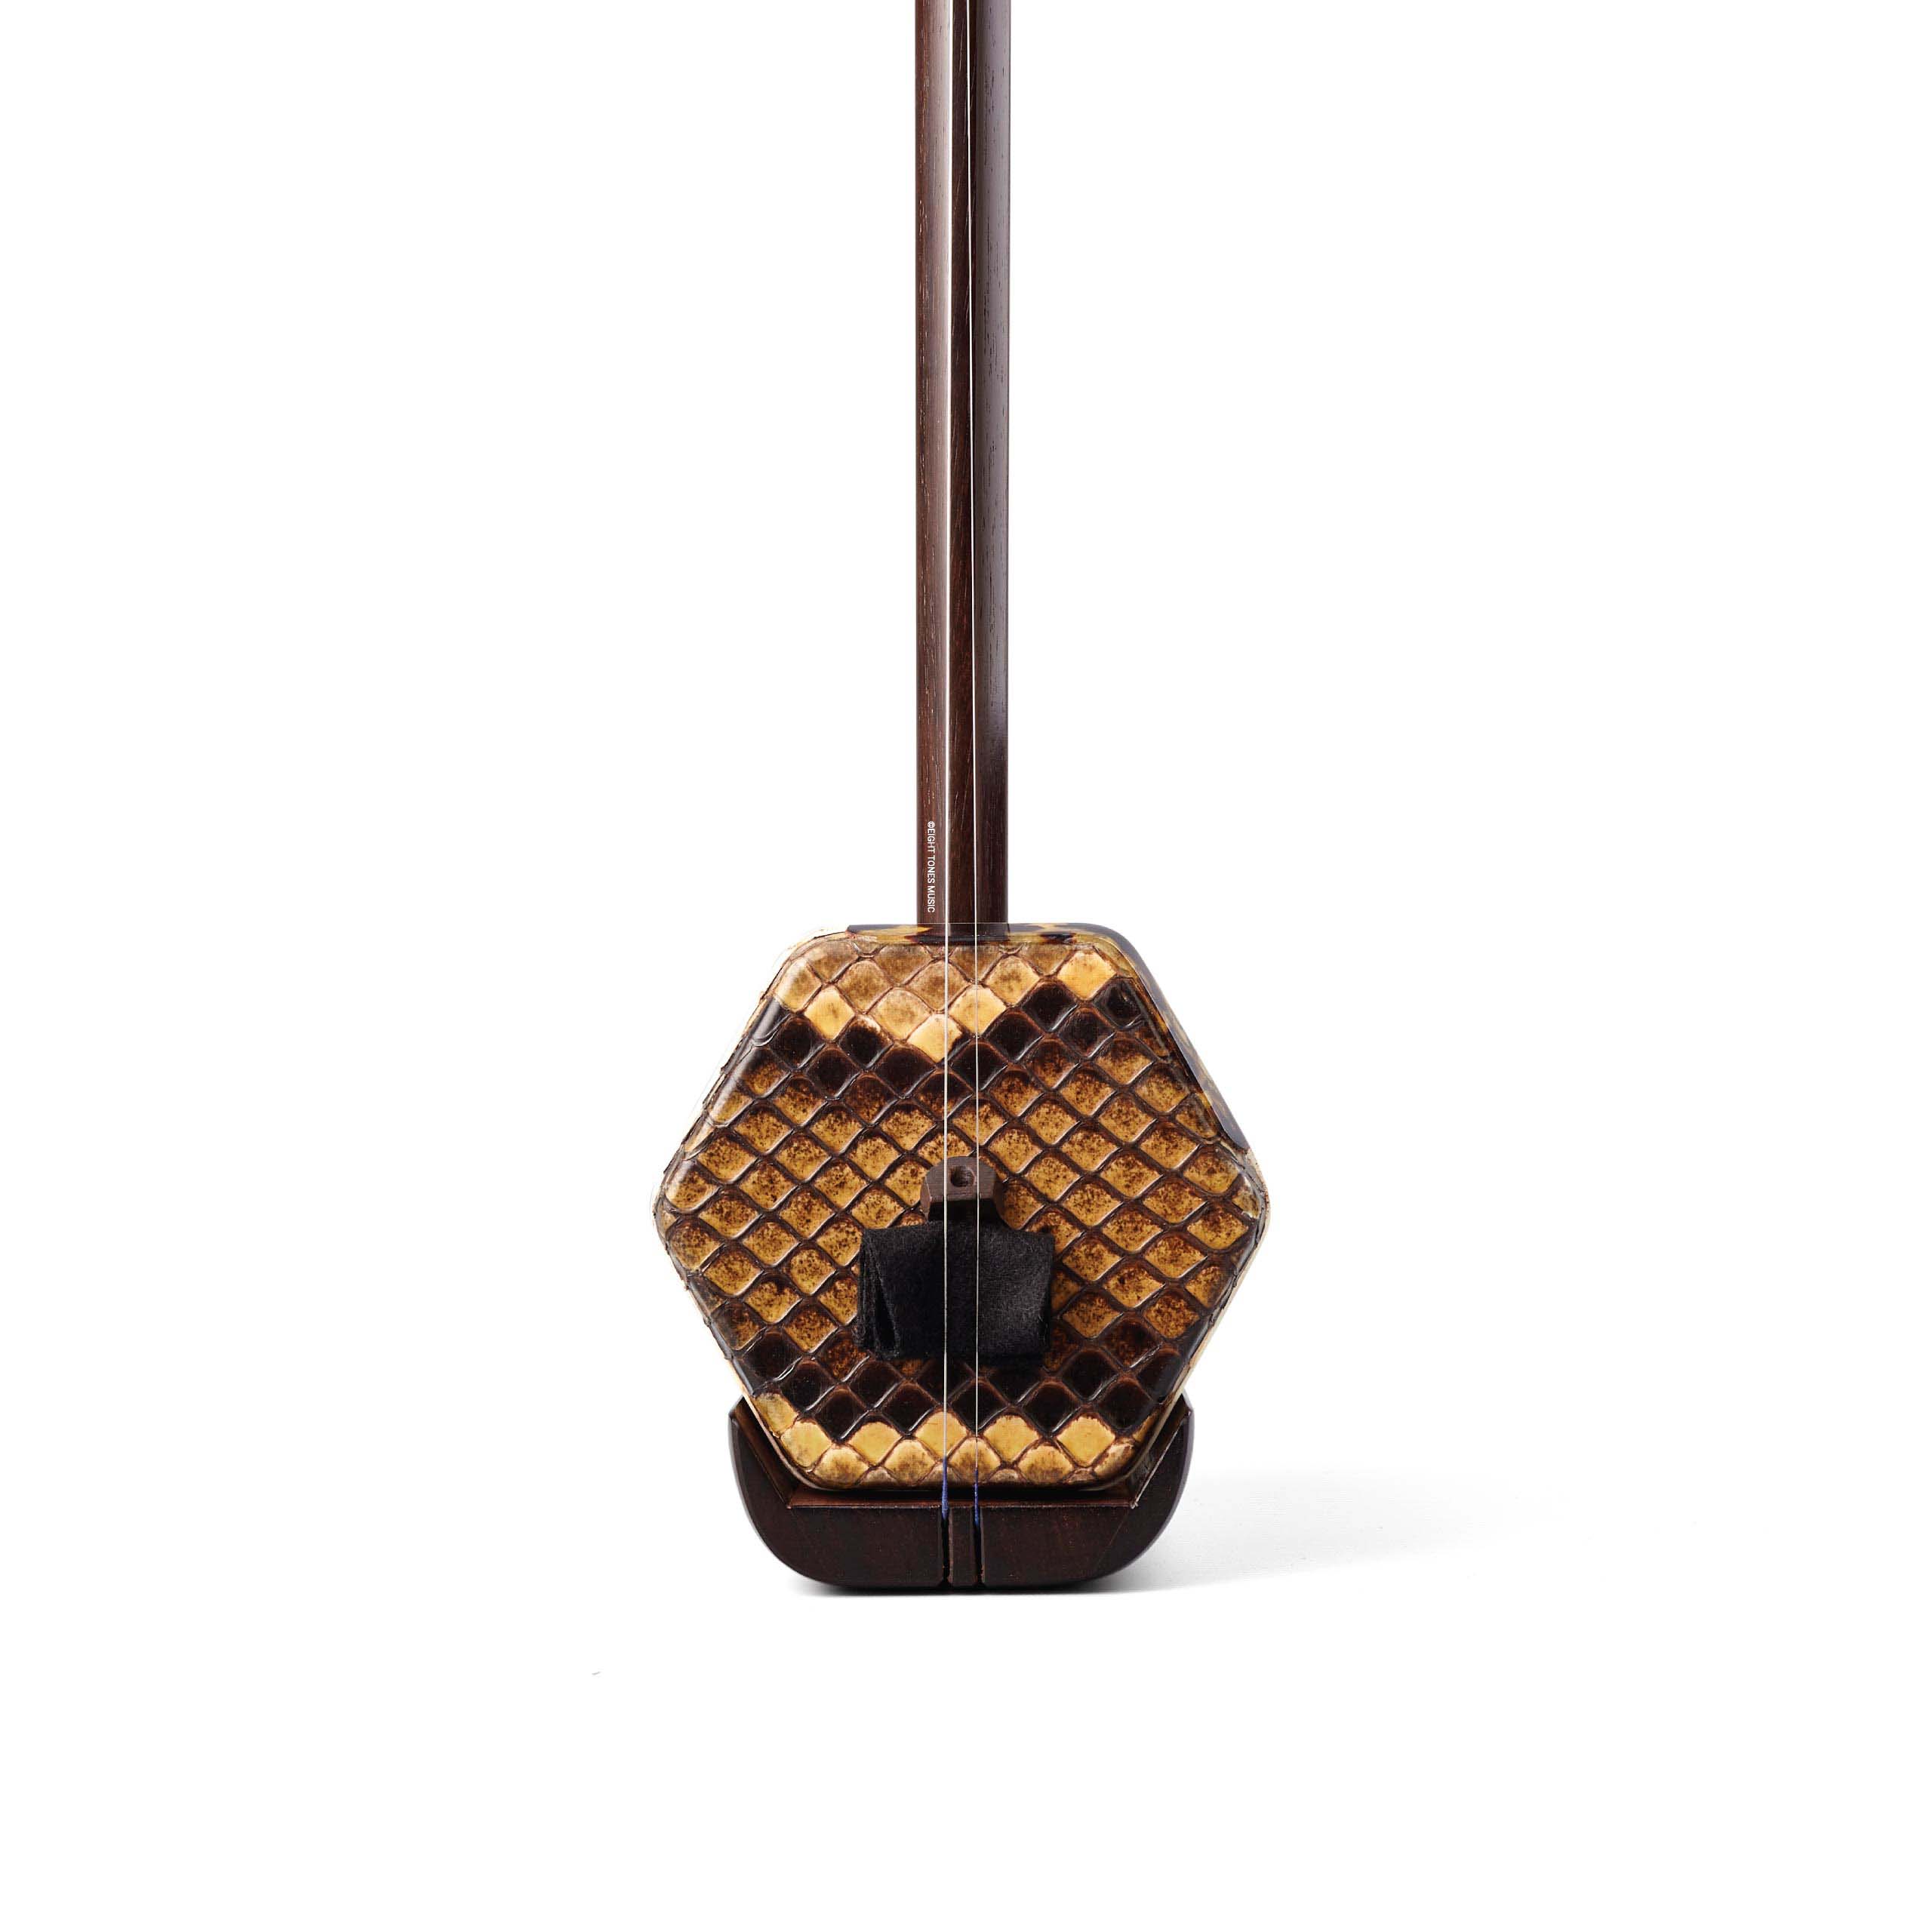 Cao Rong 2nd Grade Aged Rosewood Erhu front view